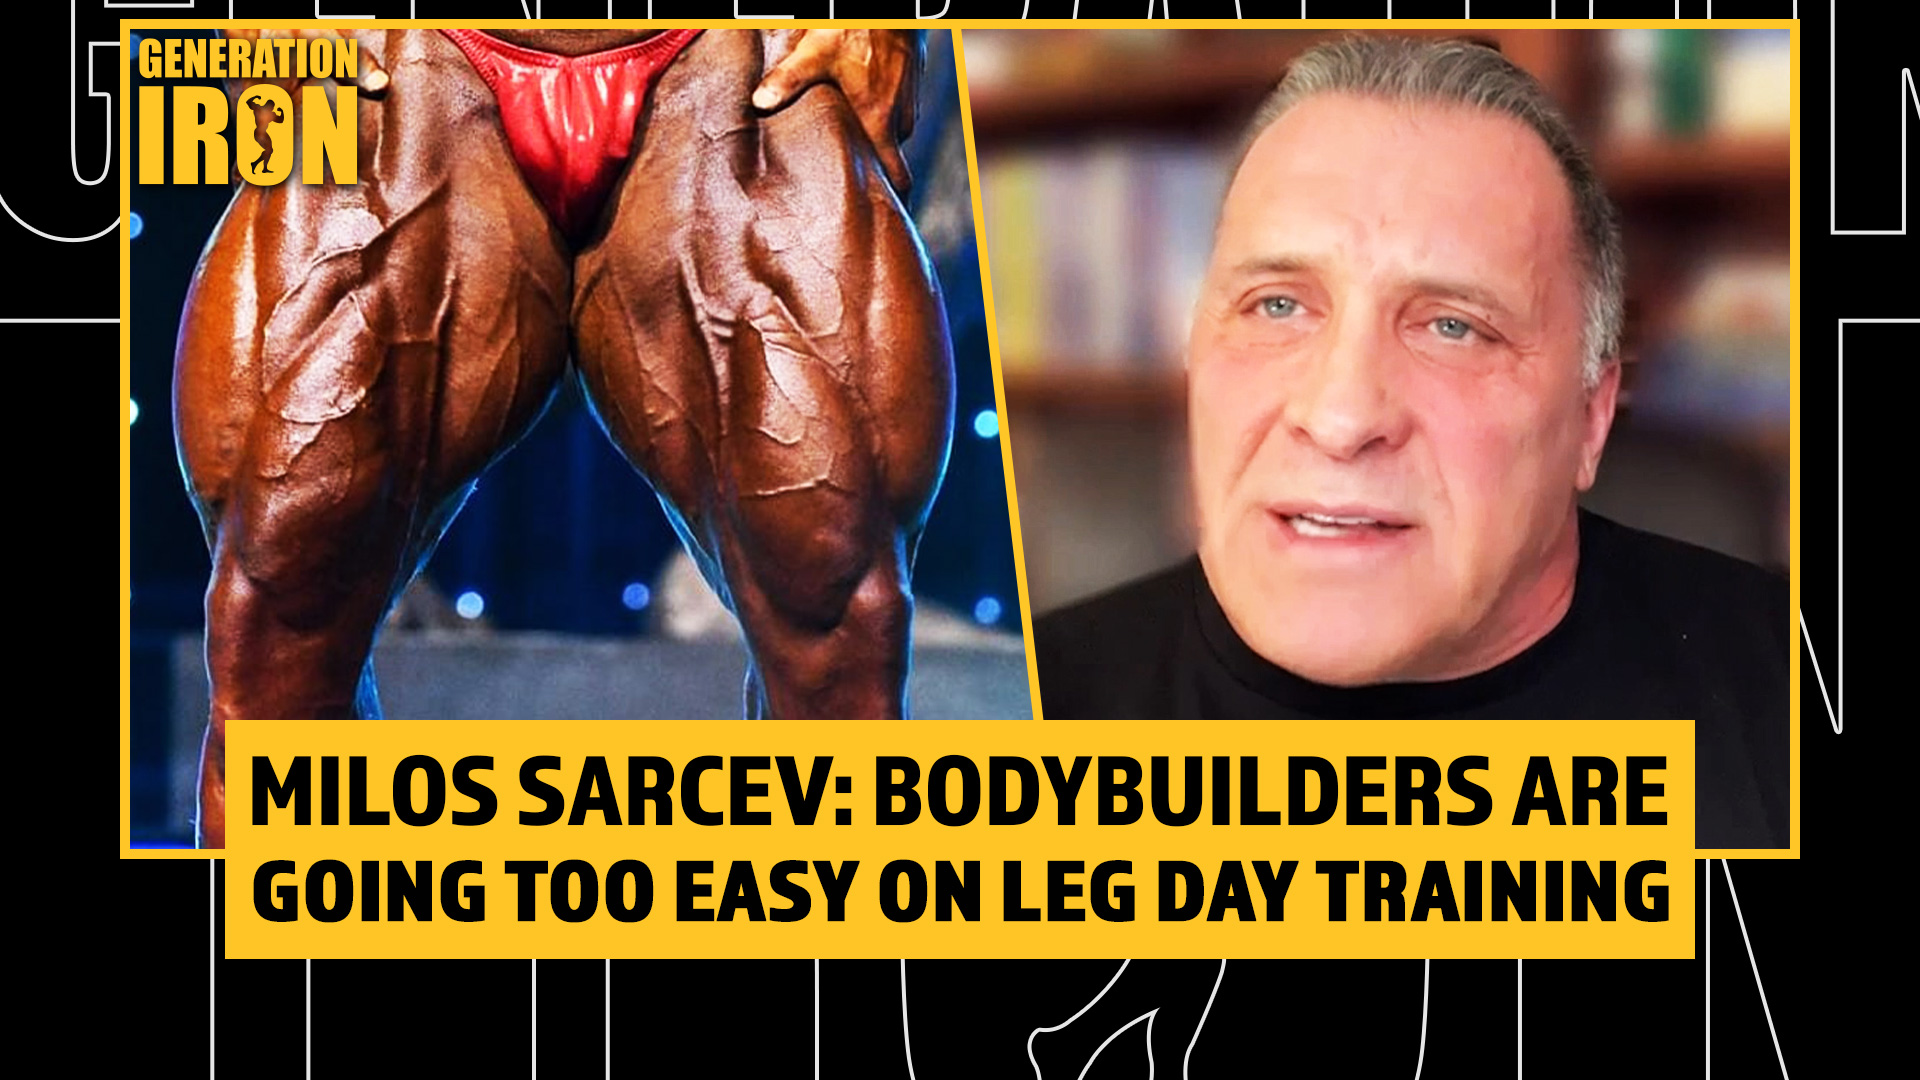 Milos Sarcev: Today’s Bodybuilders Are Going Too Easy On Leg Day Training